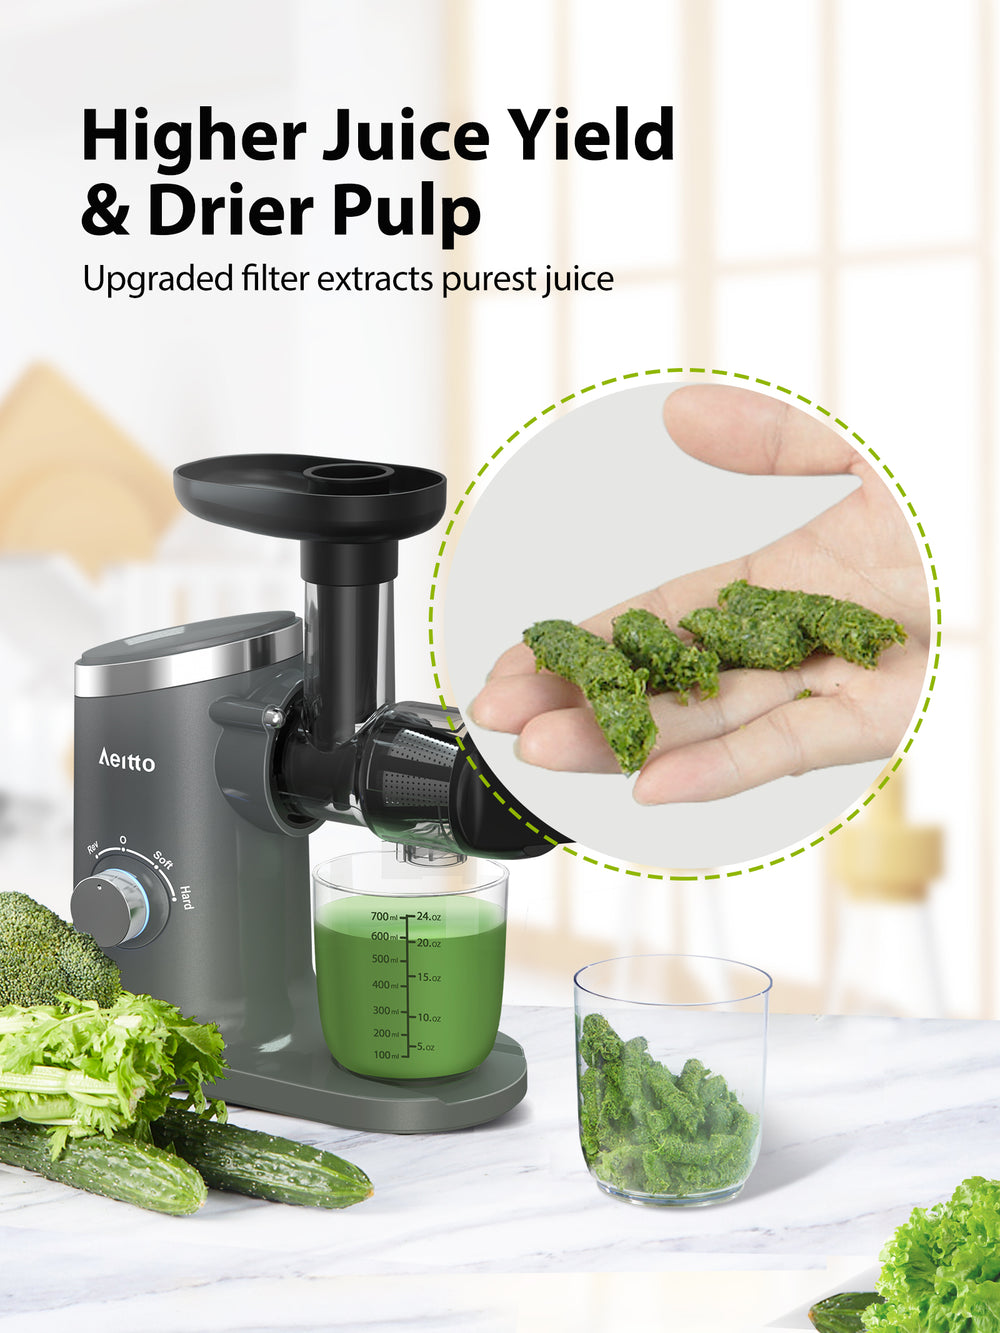 Hurom H101 Slow Juicer Review: Powerful, Quiet, Easy to Clean